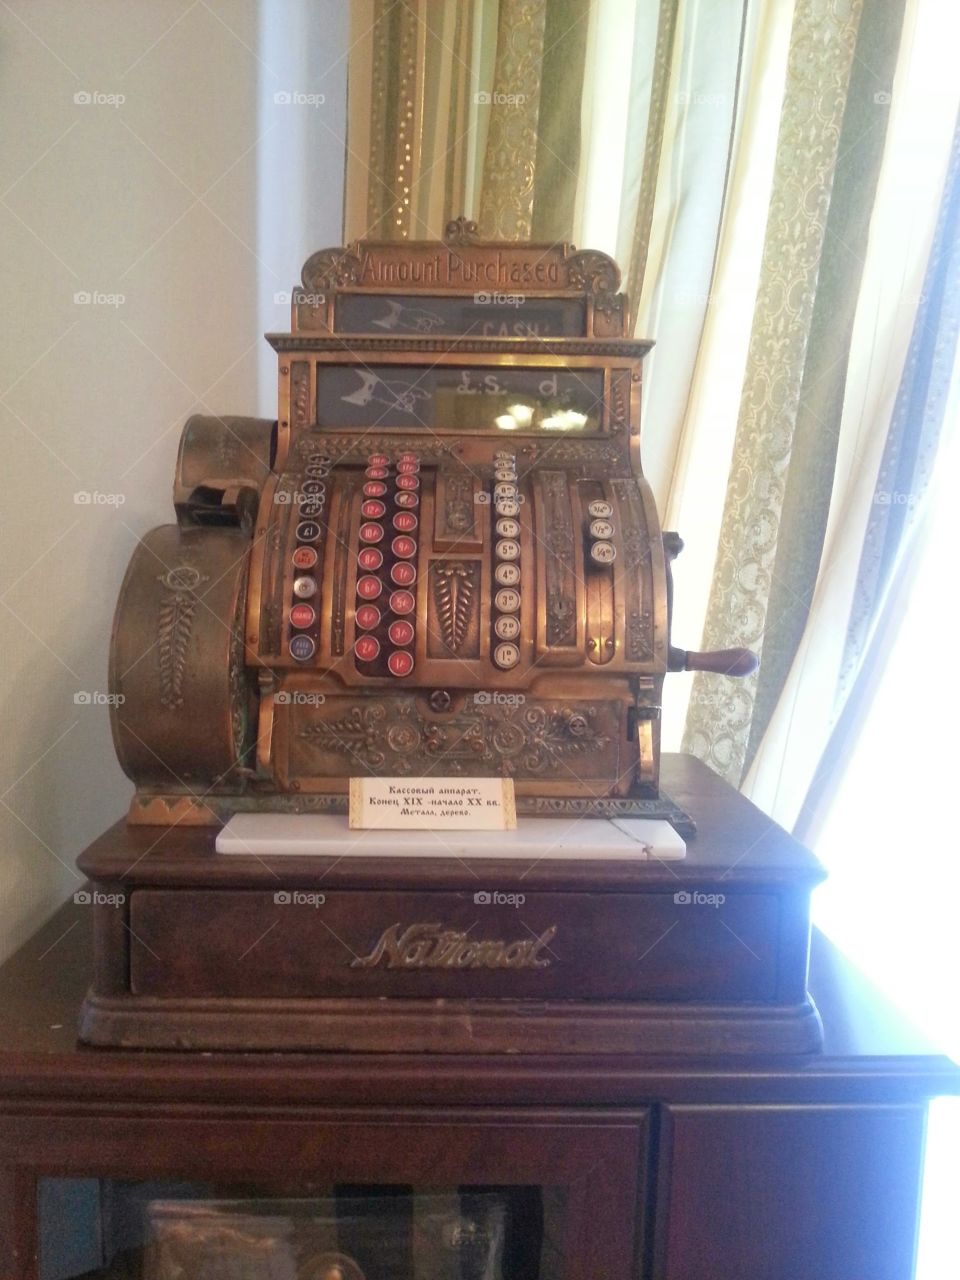 cash register. old cash register from the early 20th century